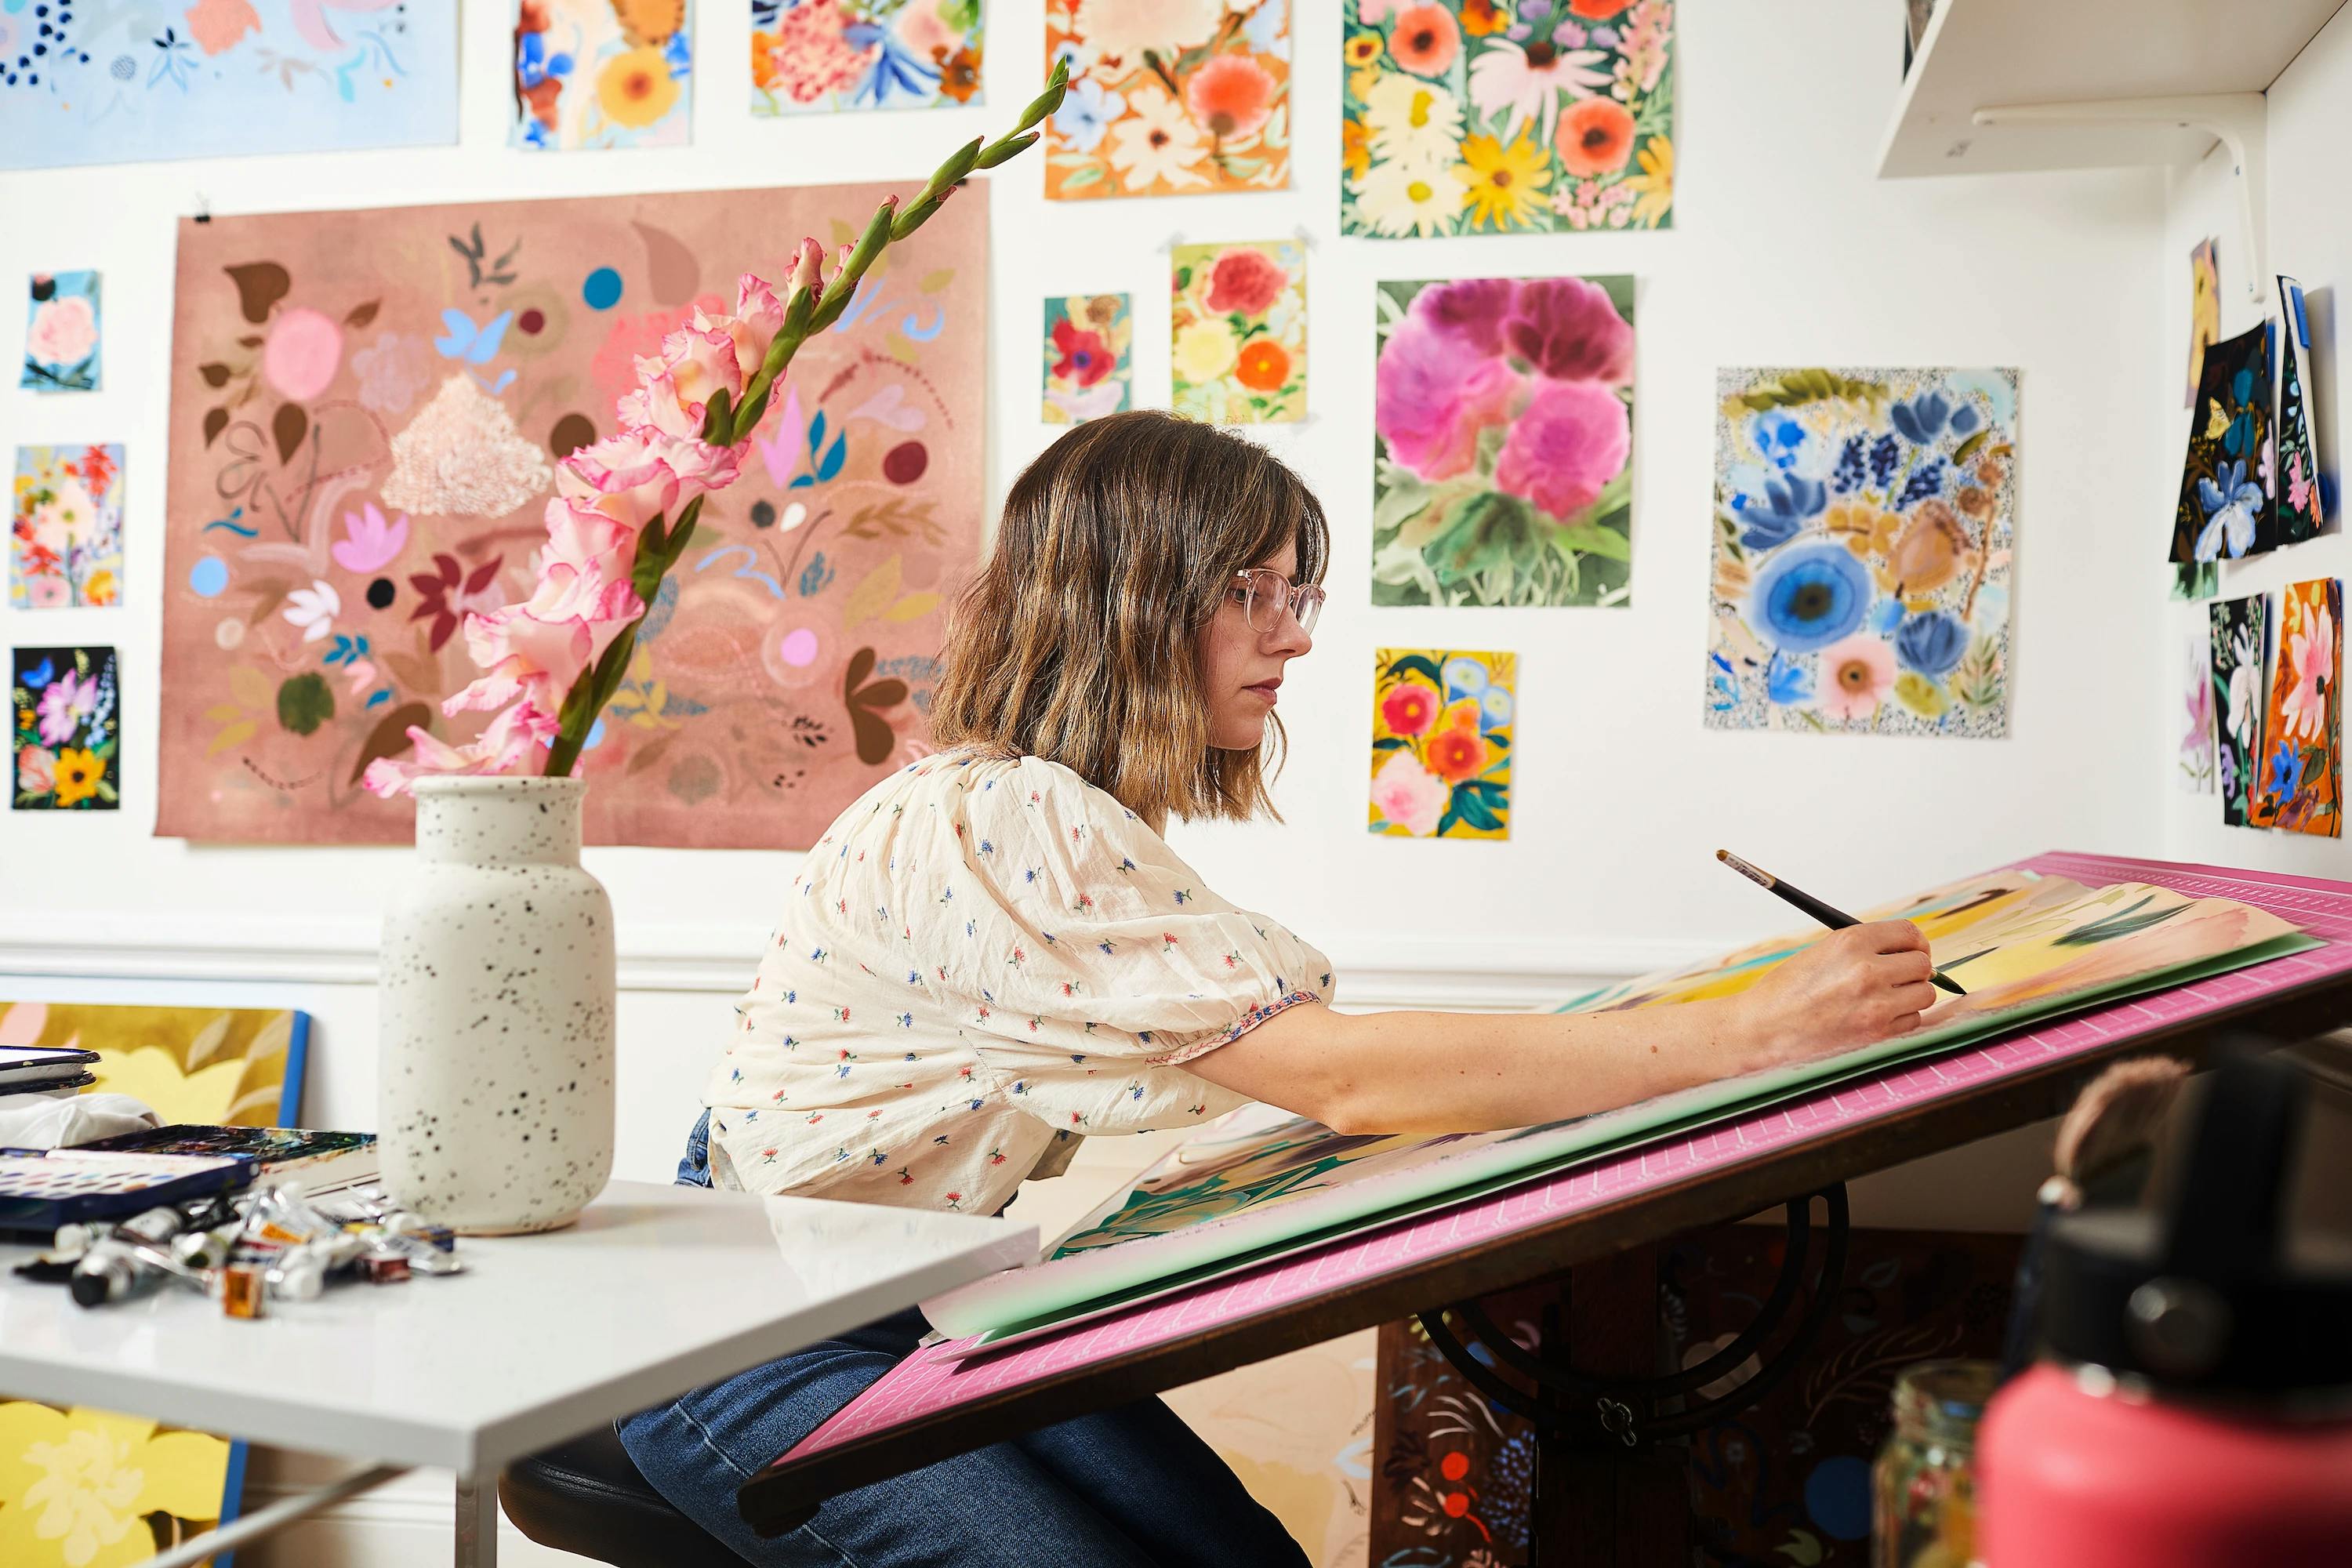 Artist Kayla Plosz Antiel sitting at a table in her studio working on a watercolor painting. She is surrounded by her floral artworks hanging on the walls around her.